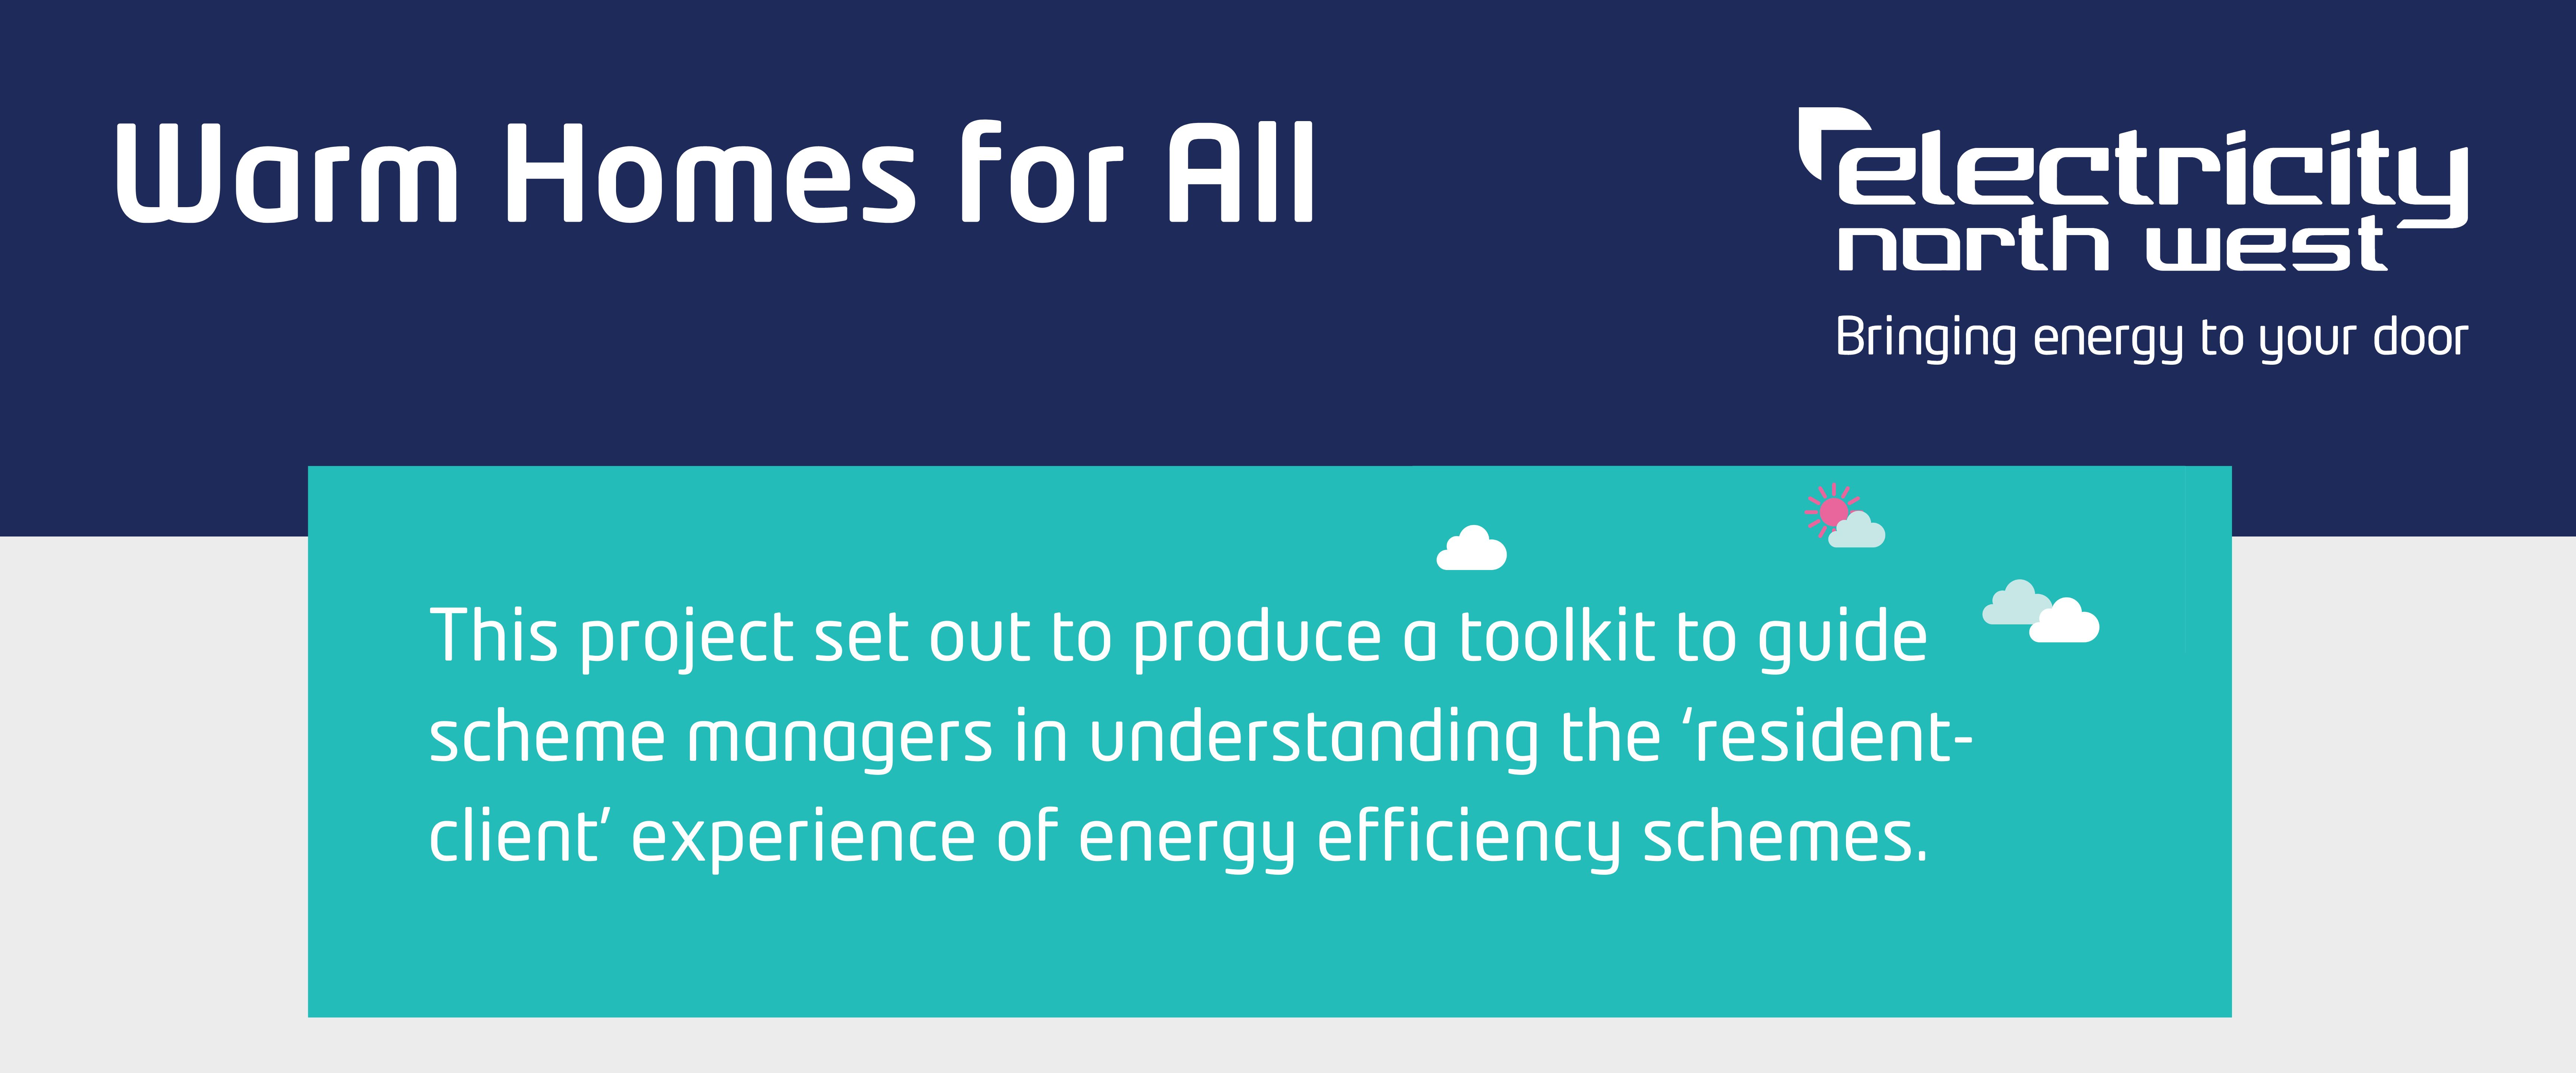 Warm Homes for All, This project set out to produce a toolkit to guide scheme managers in understanding the ‘resident-client’ experience of energy efficiency schemes.  
